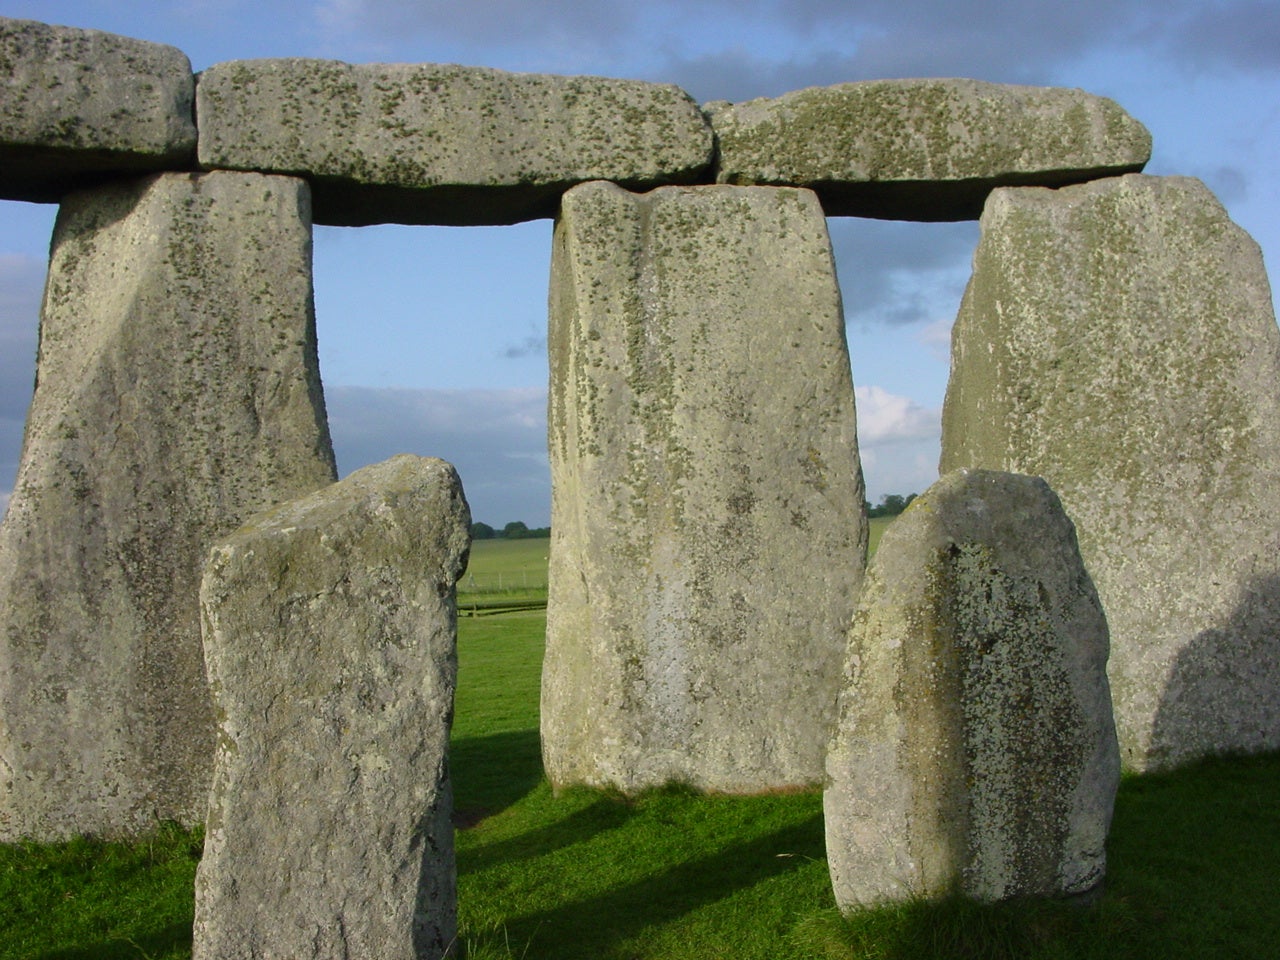 Opening up: Stonehenge will resume as a tourist attraction on 12 April